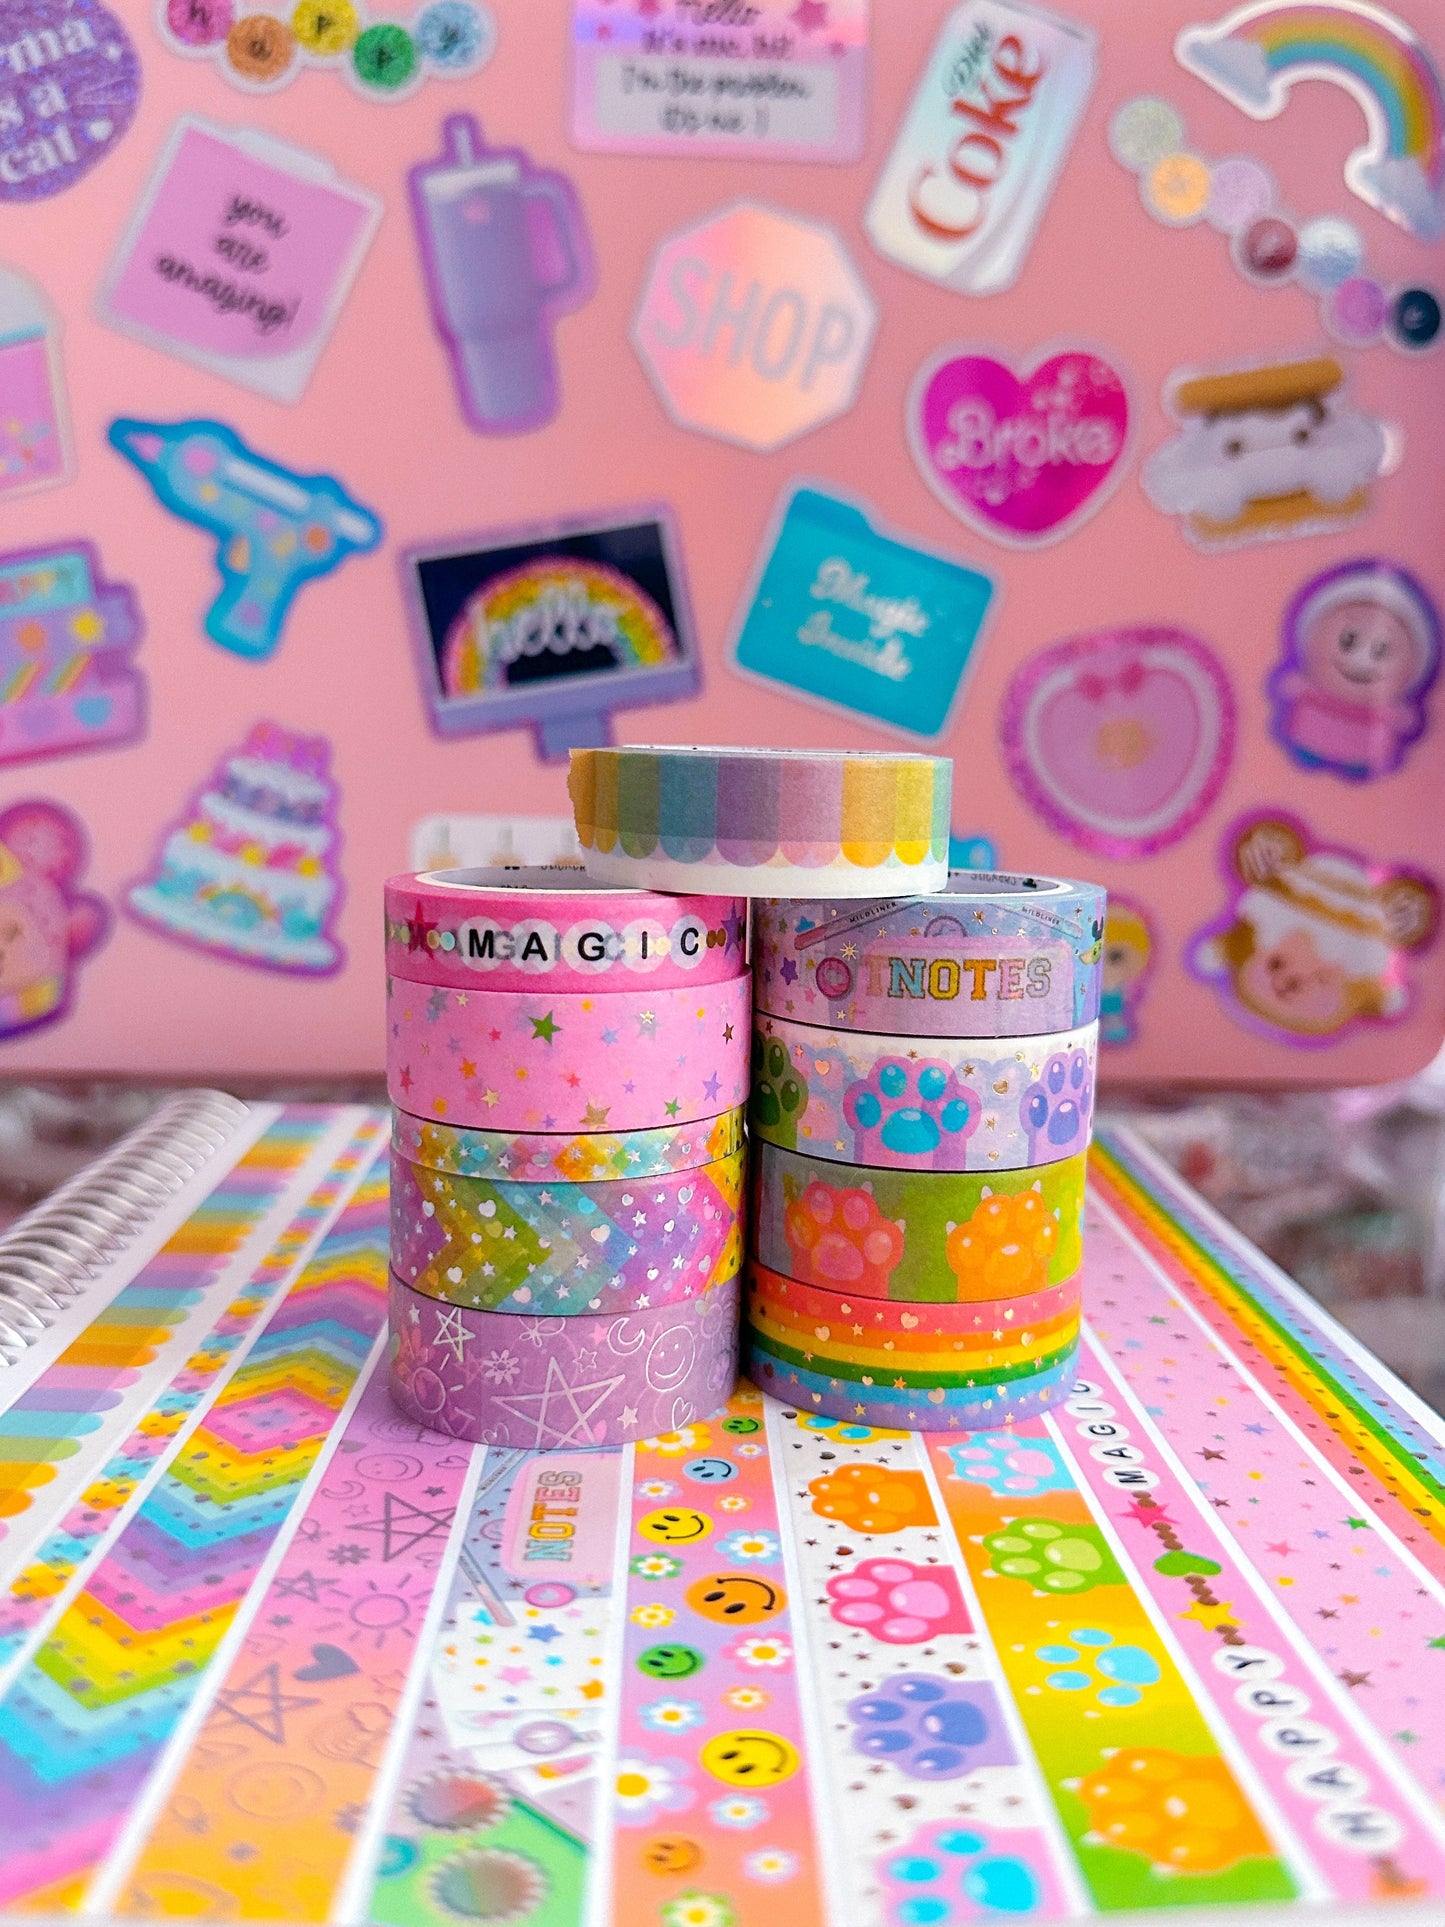 15MM Washi Tape - Groovy Happy Faces & Flowers